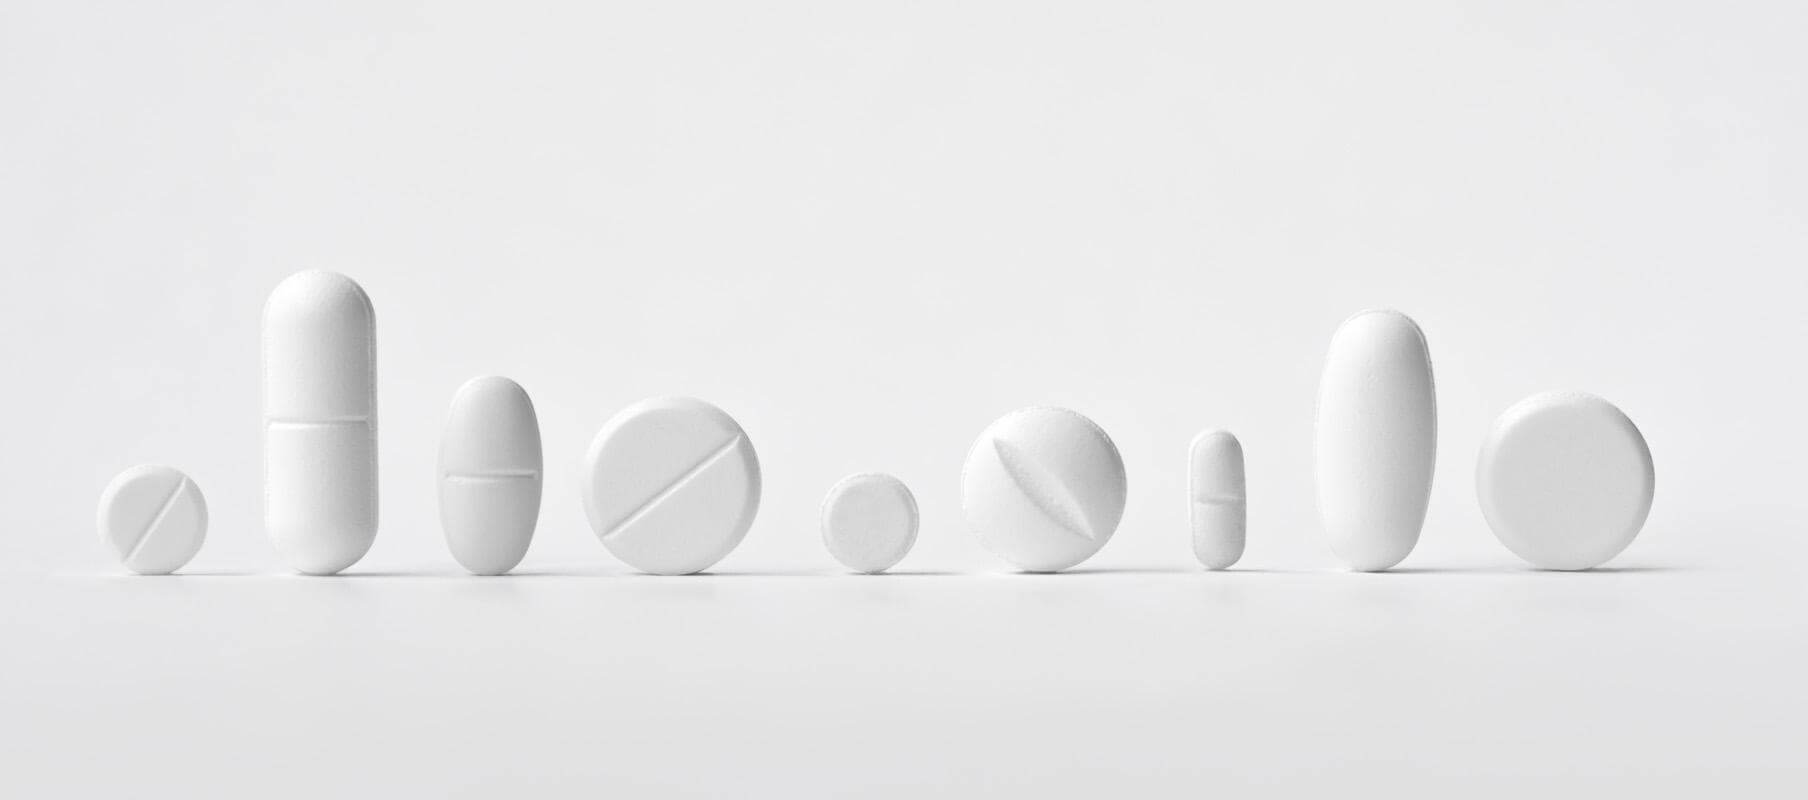 A photo showing different medication pills